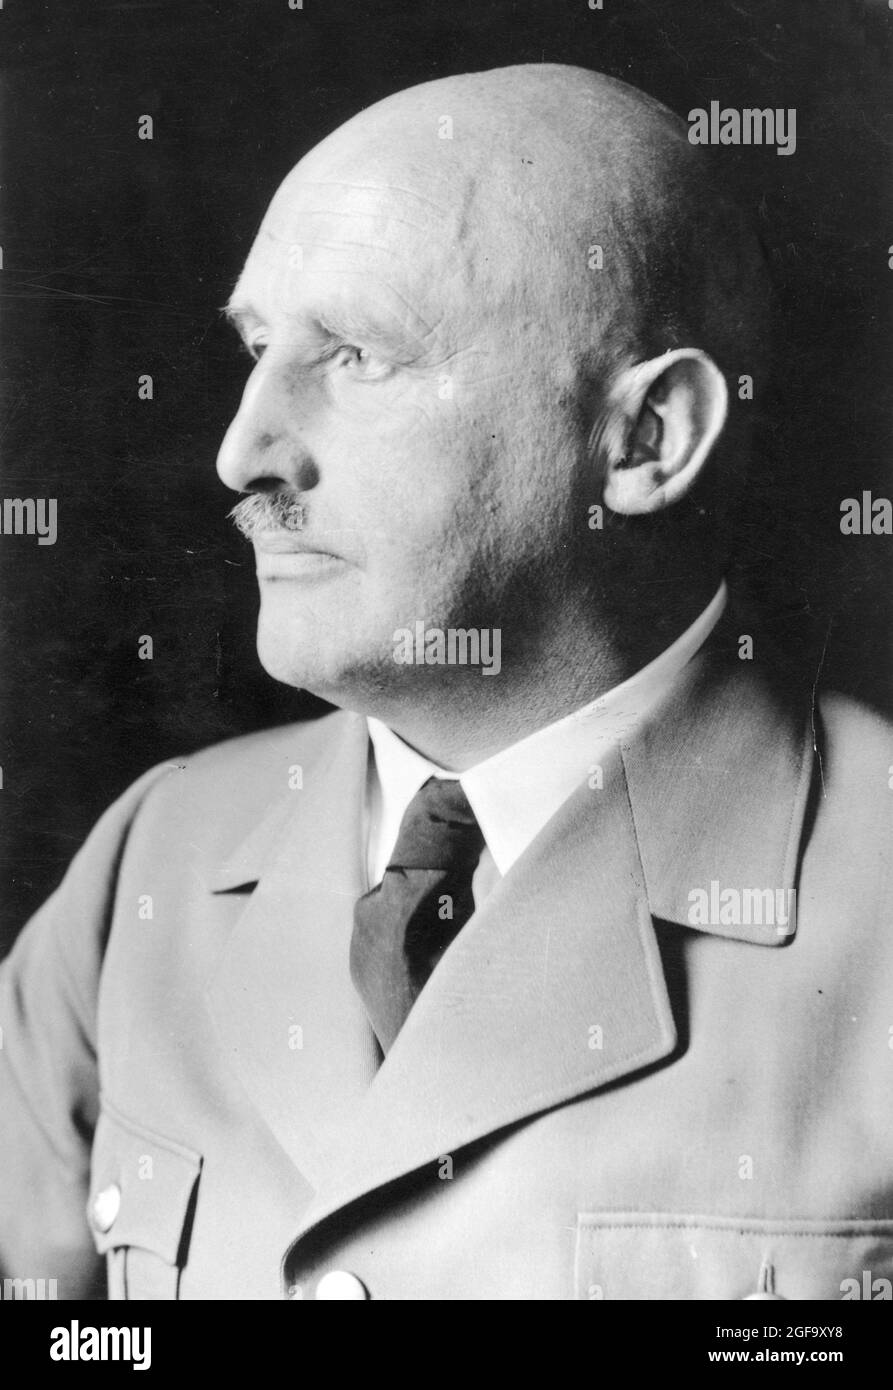 A 1935 portrait of Julius Streicher, Nazi, editor of the antisemitic Die Stürmer newspaper and Gauleiter of Franconia. He was tried and condemned to death at Nuremberg in 1946. Credit: German Bundesarchiv Stock Photo